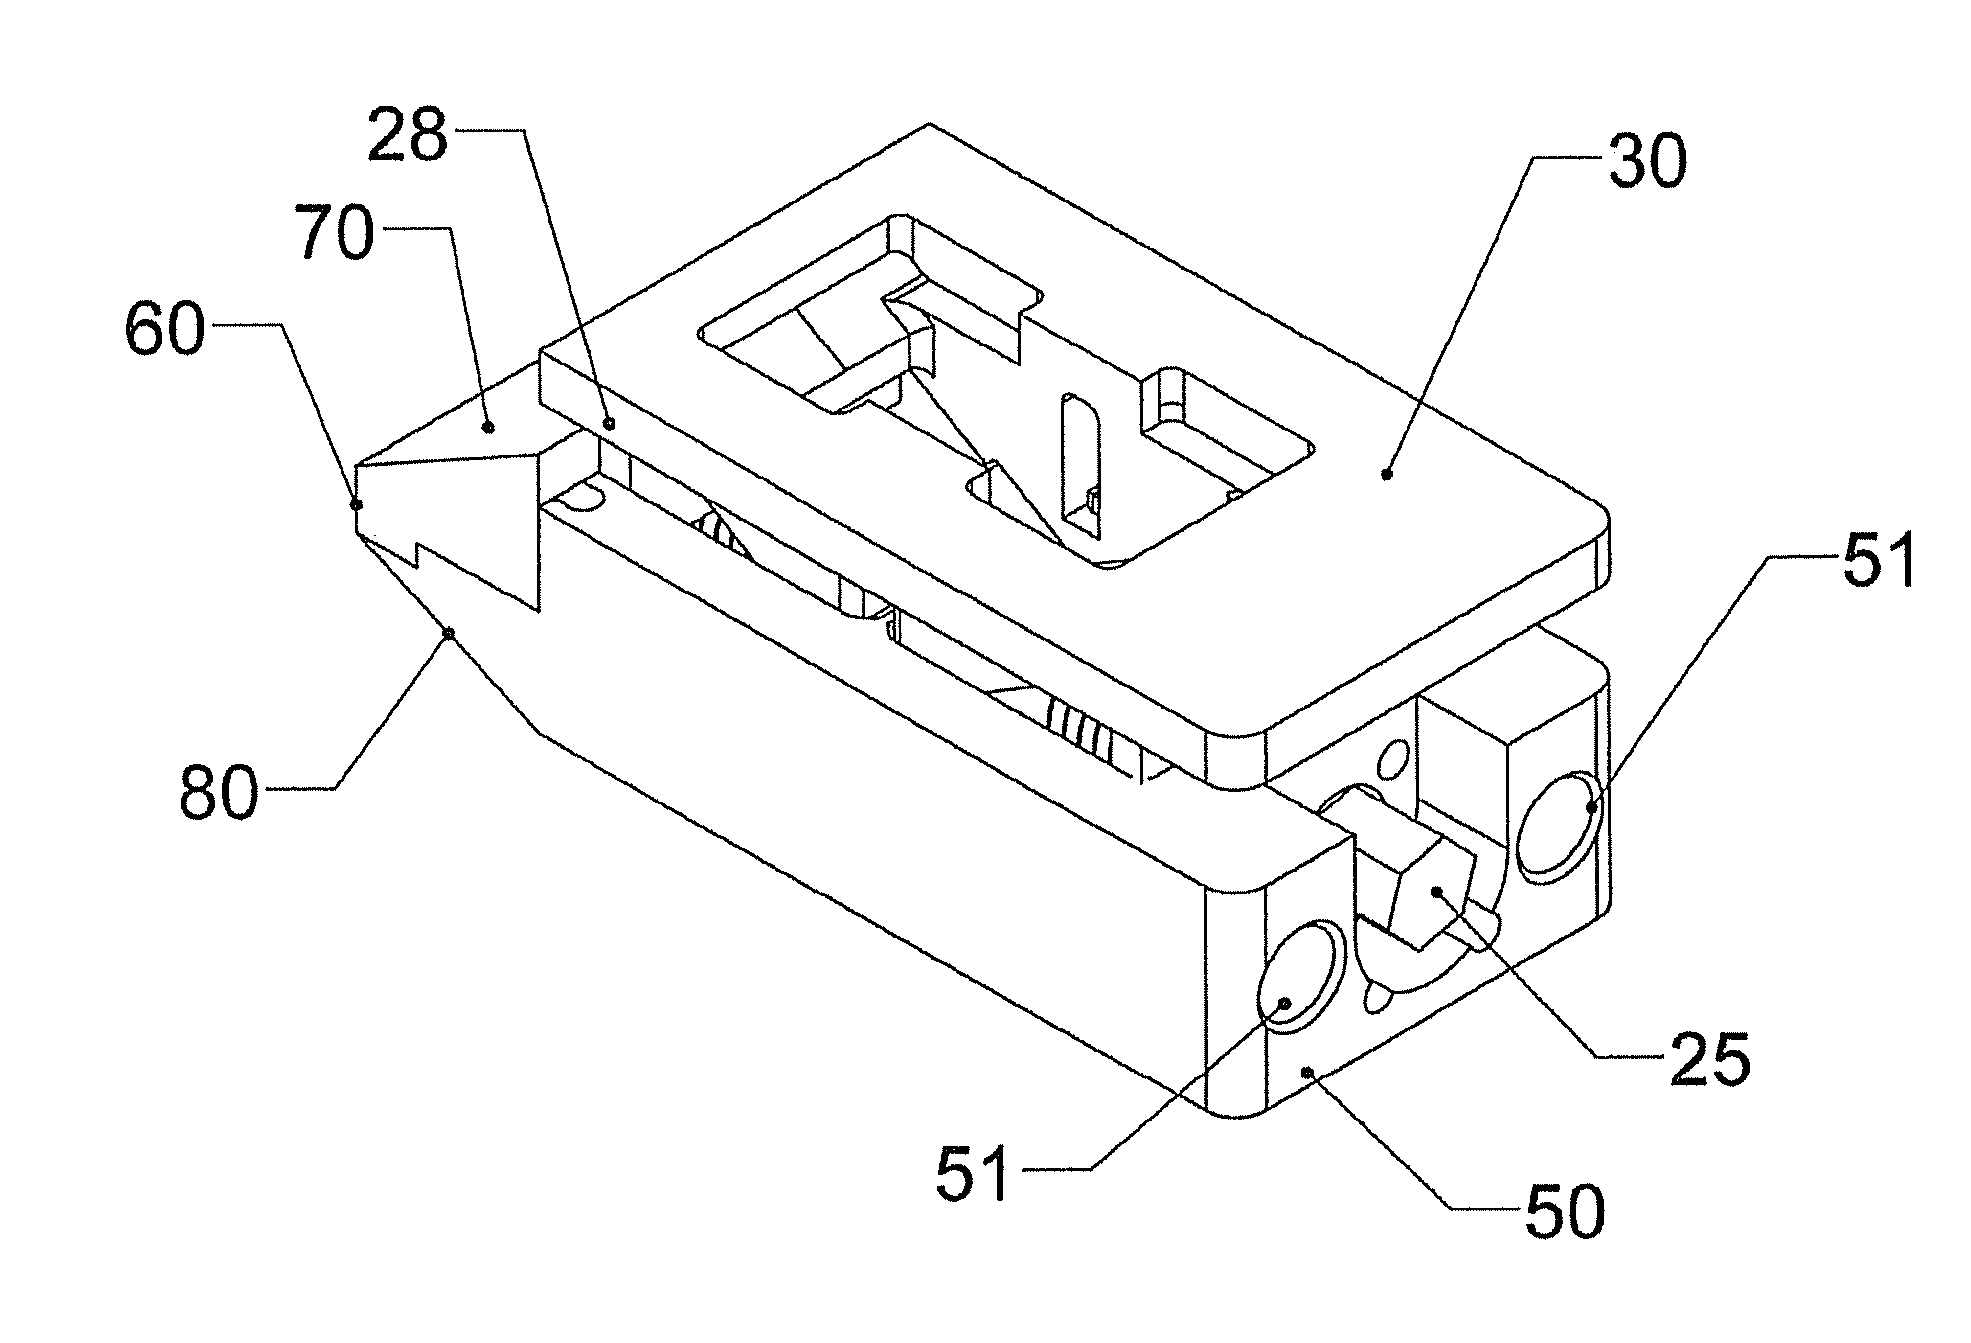 Expandable Self-Anchoring Interbody Cage for Orthopedic Applications